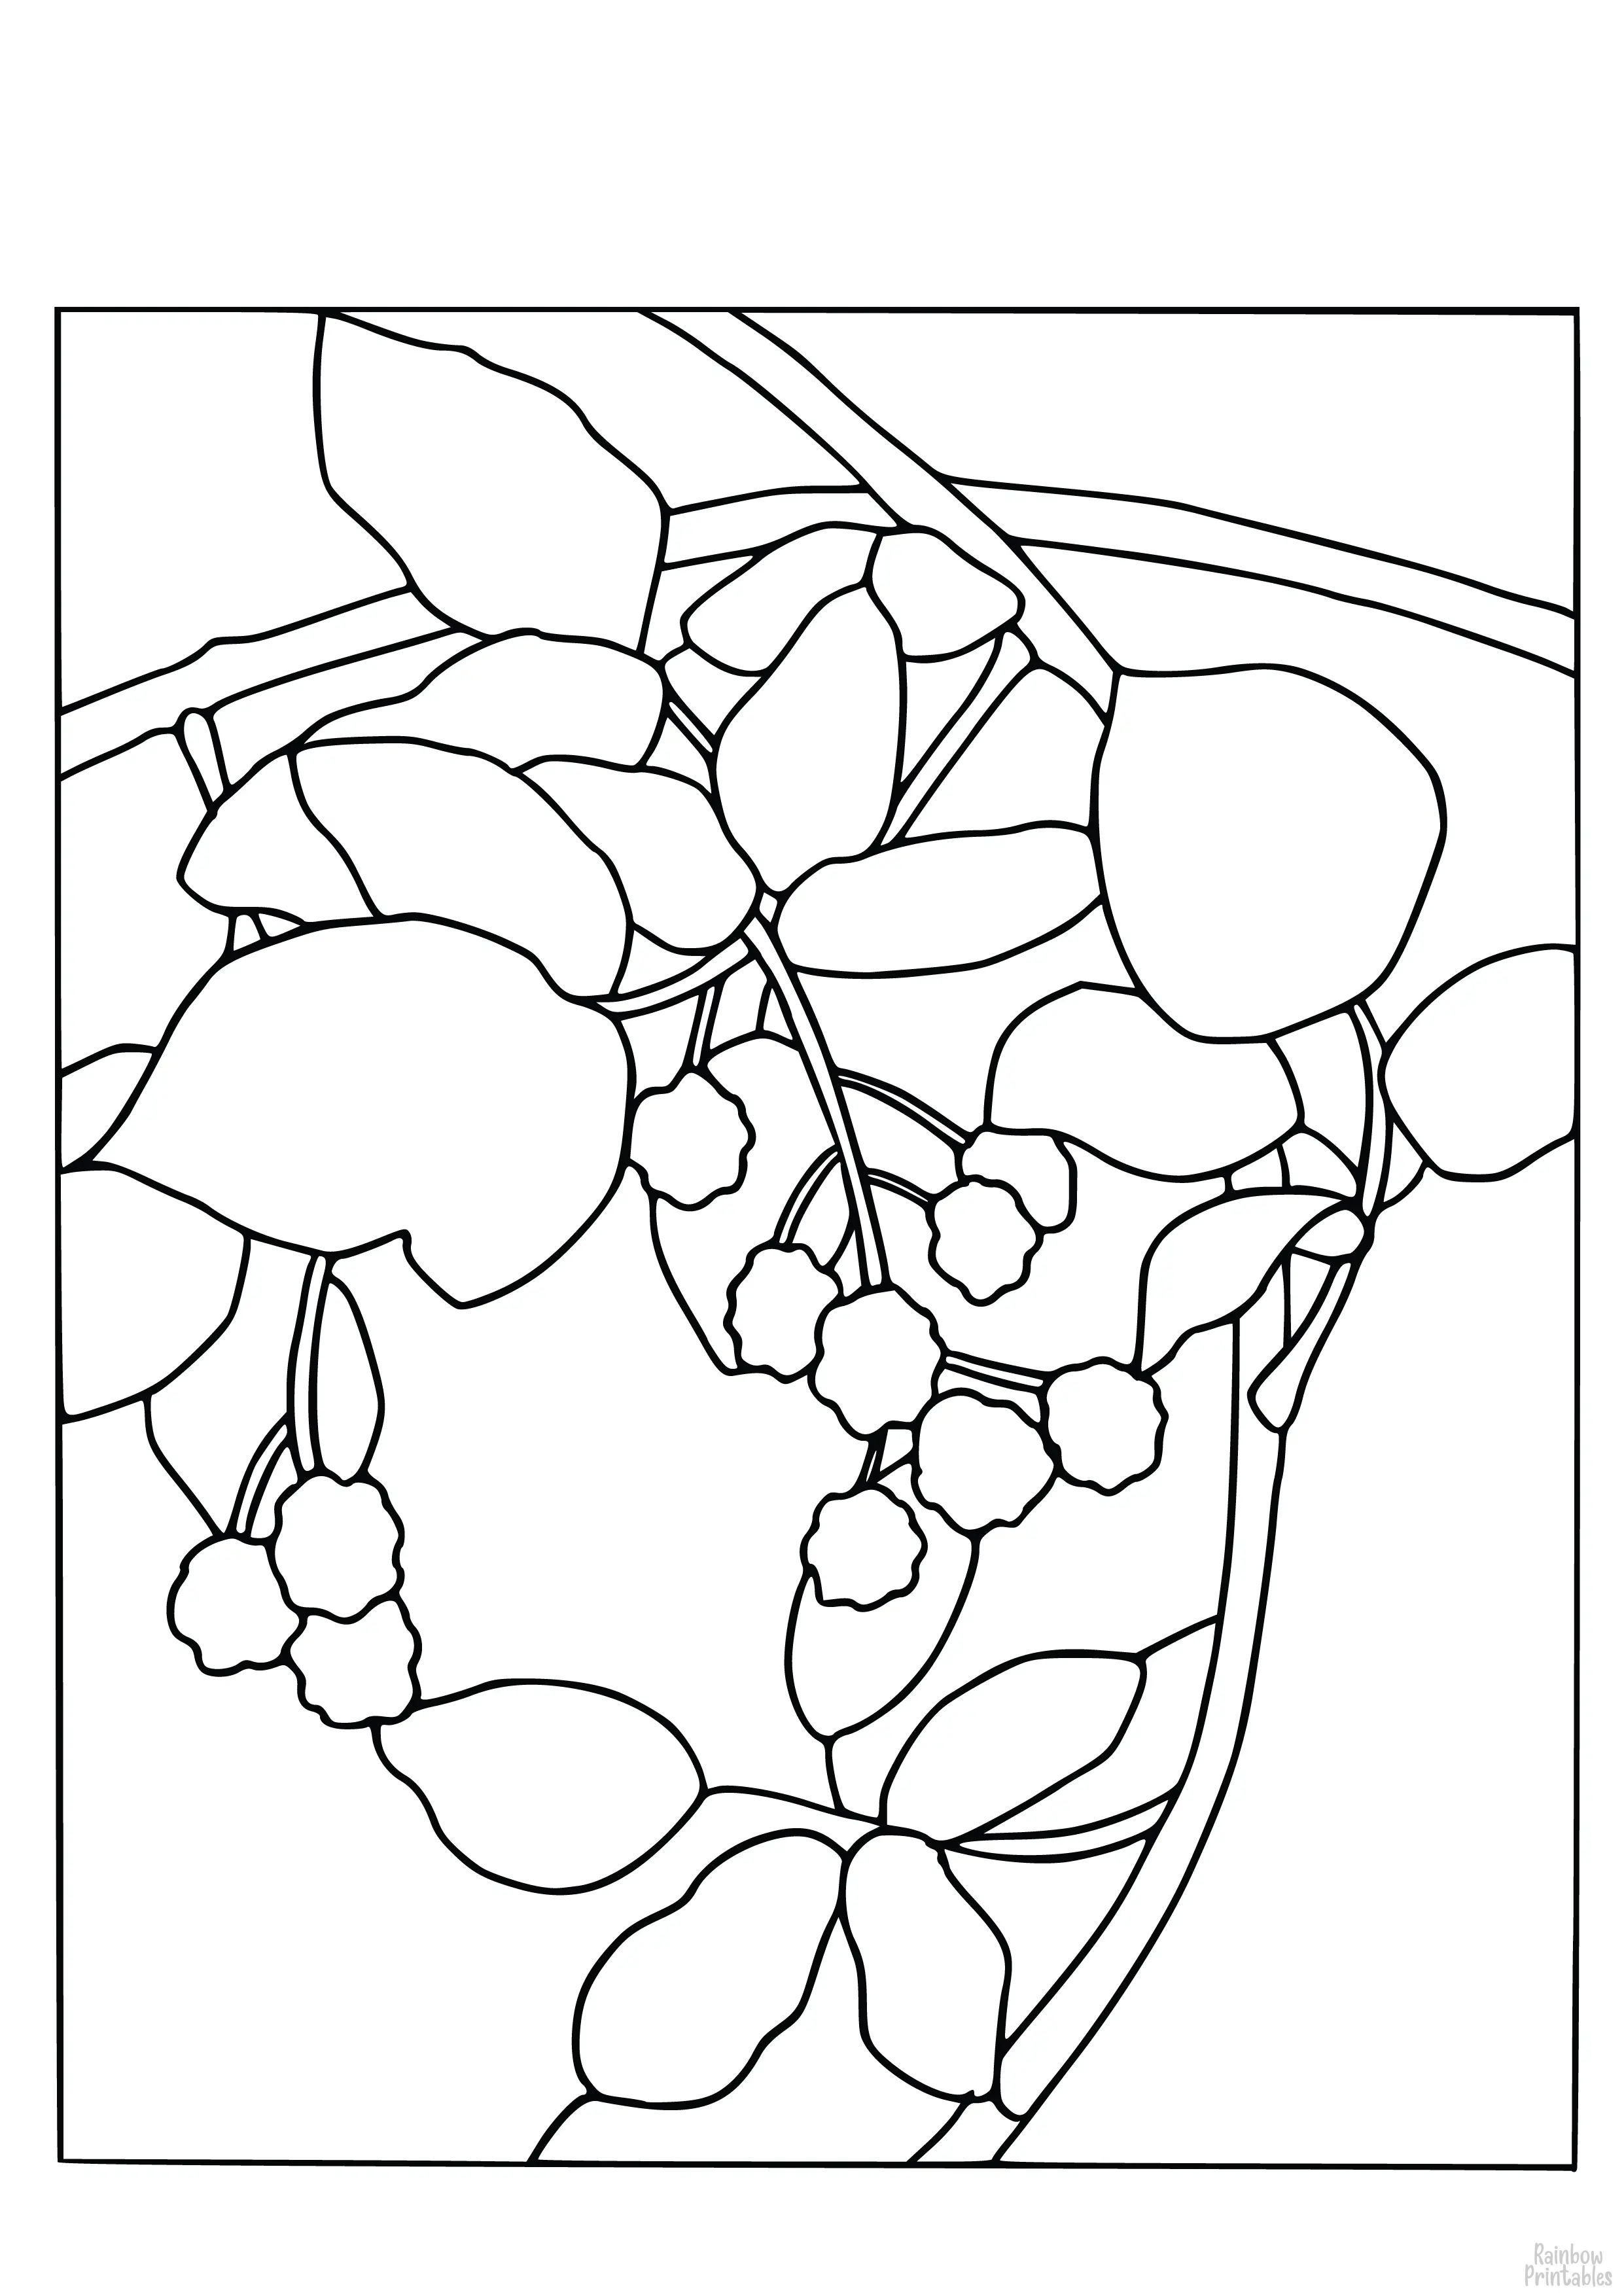 Stained GLASS Grape Vine Clipart Coloring Pages Line Art Drawings for Kids-01